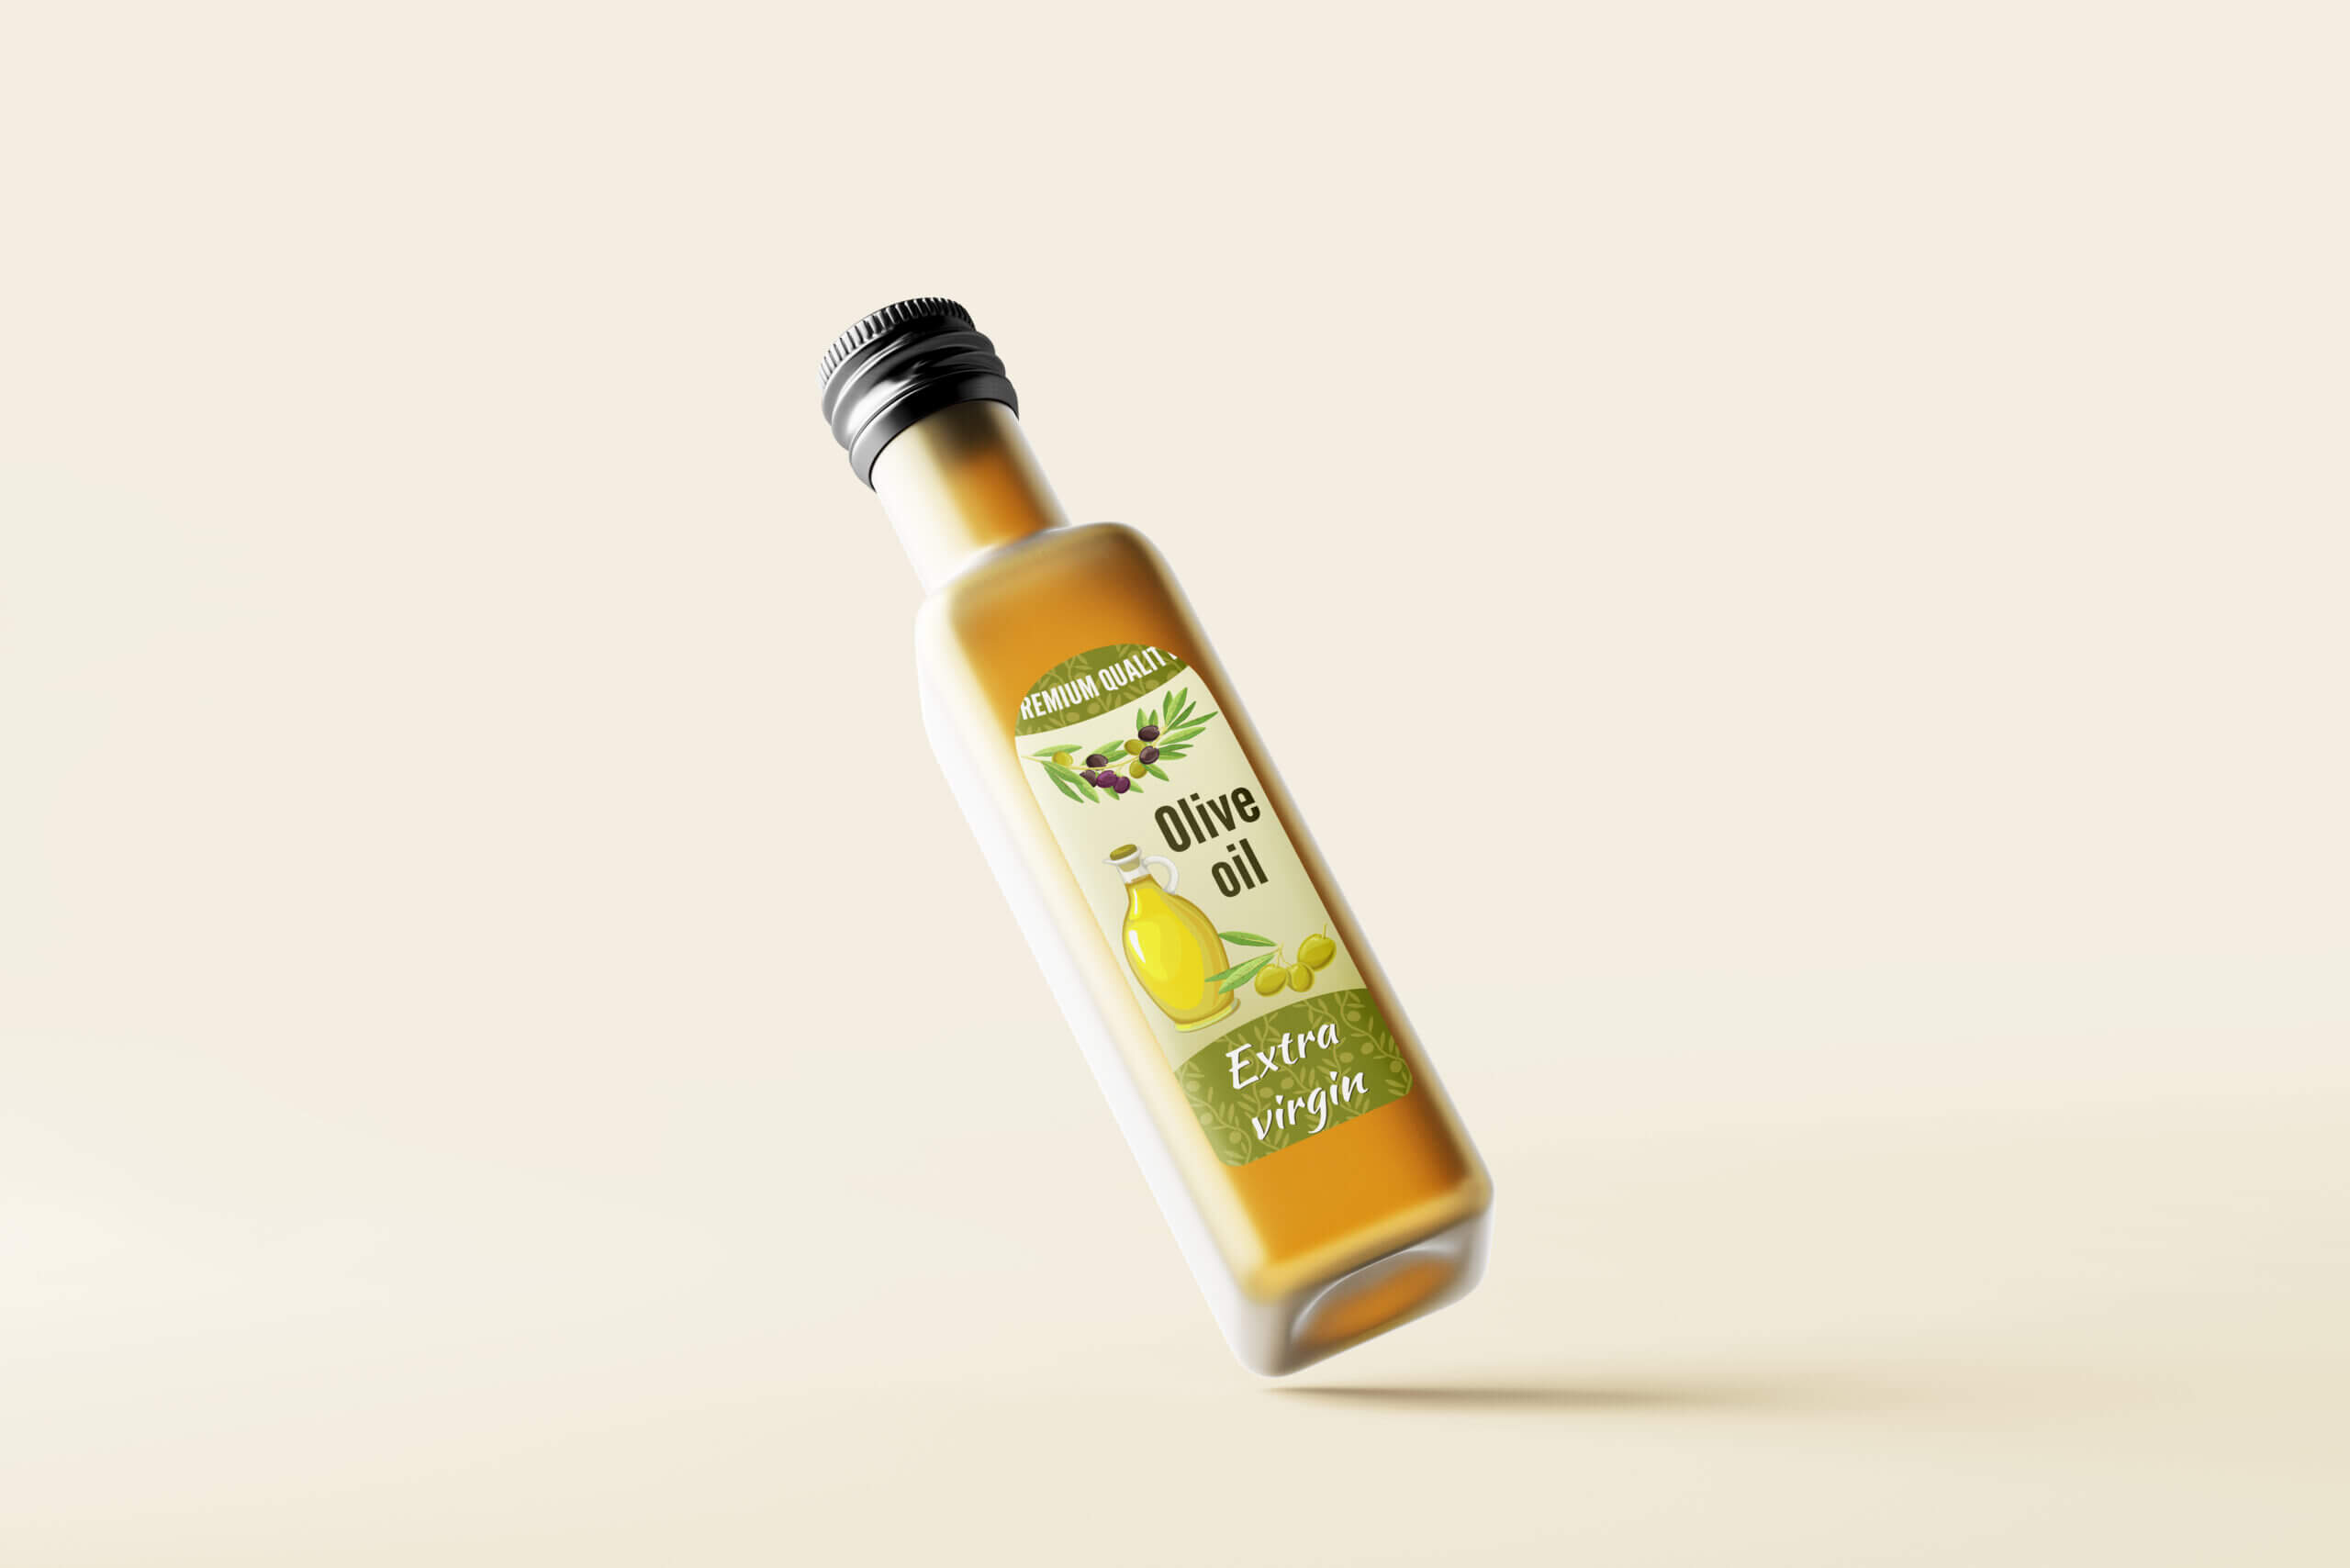 5 Free Amber Glass Square Cooking Oil Bottle Mockup PSD Files3